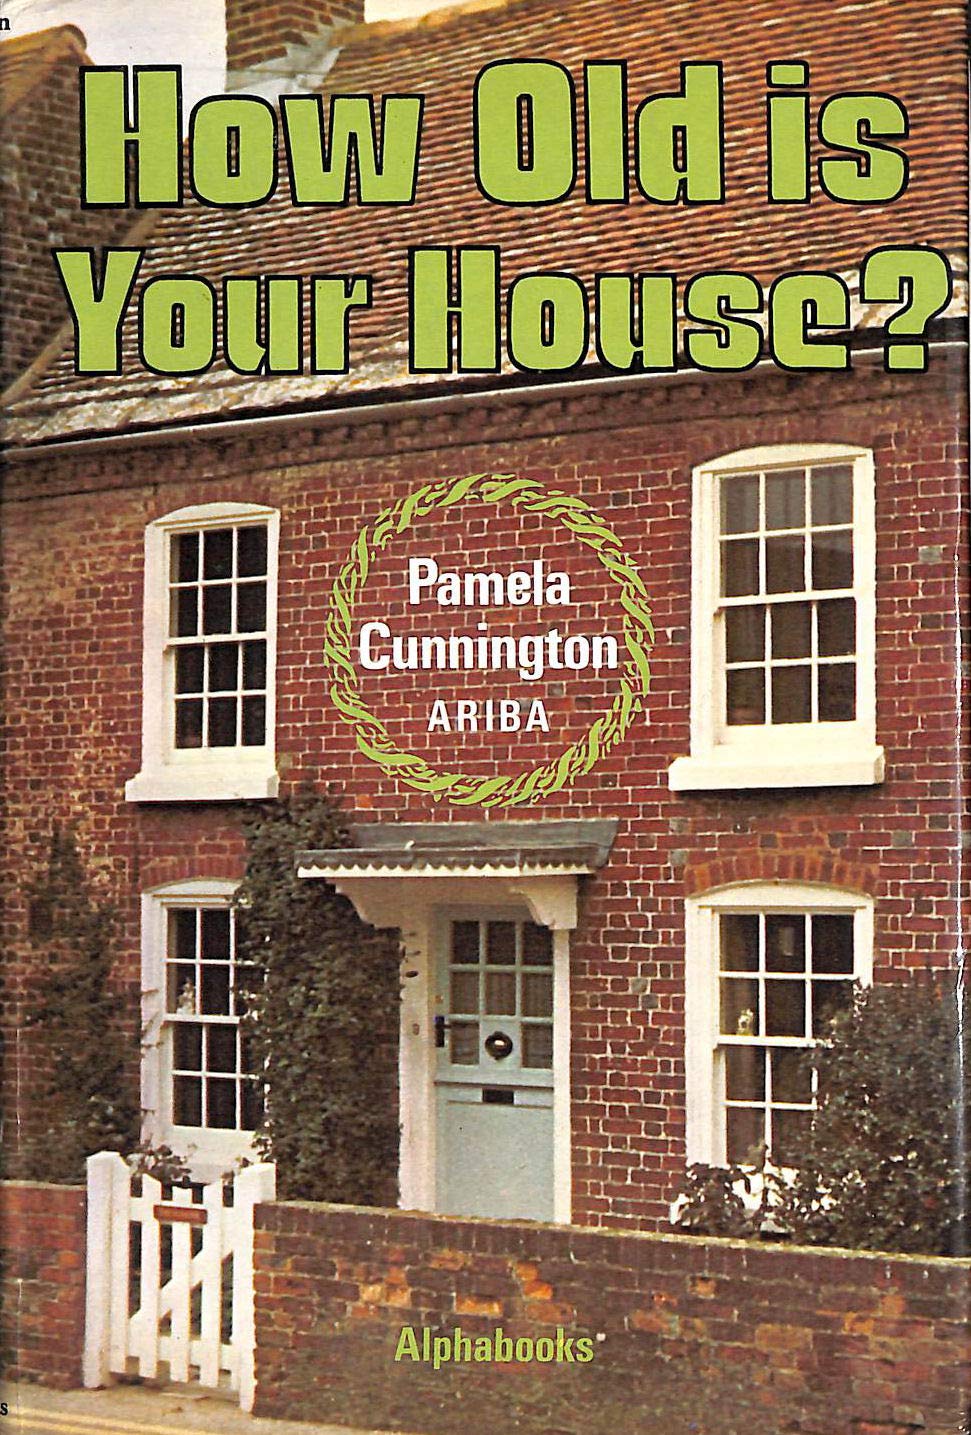 How Old is Your House? Cunnington, Pamela